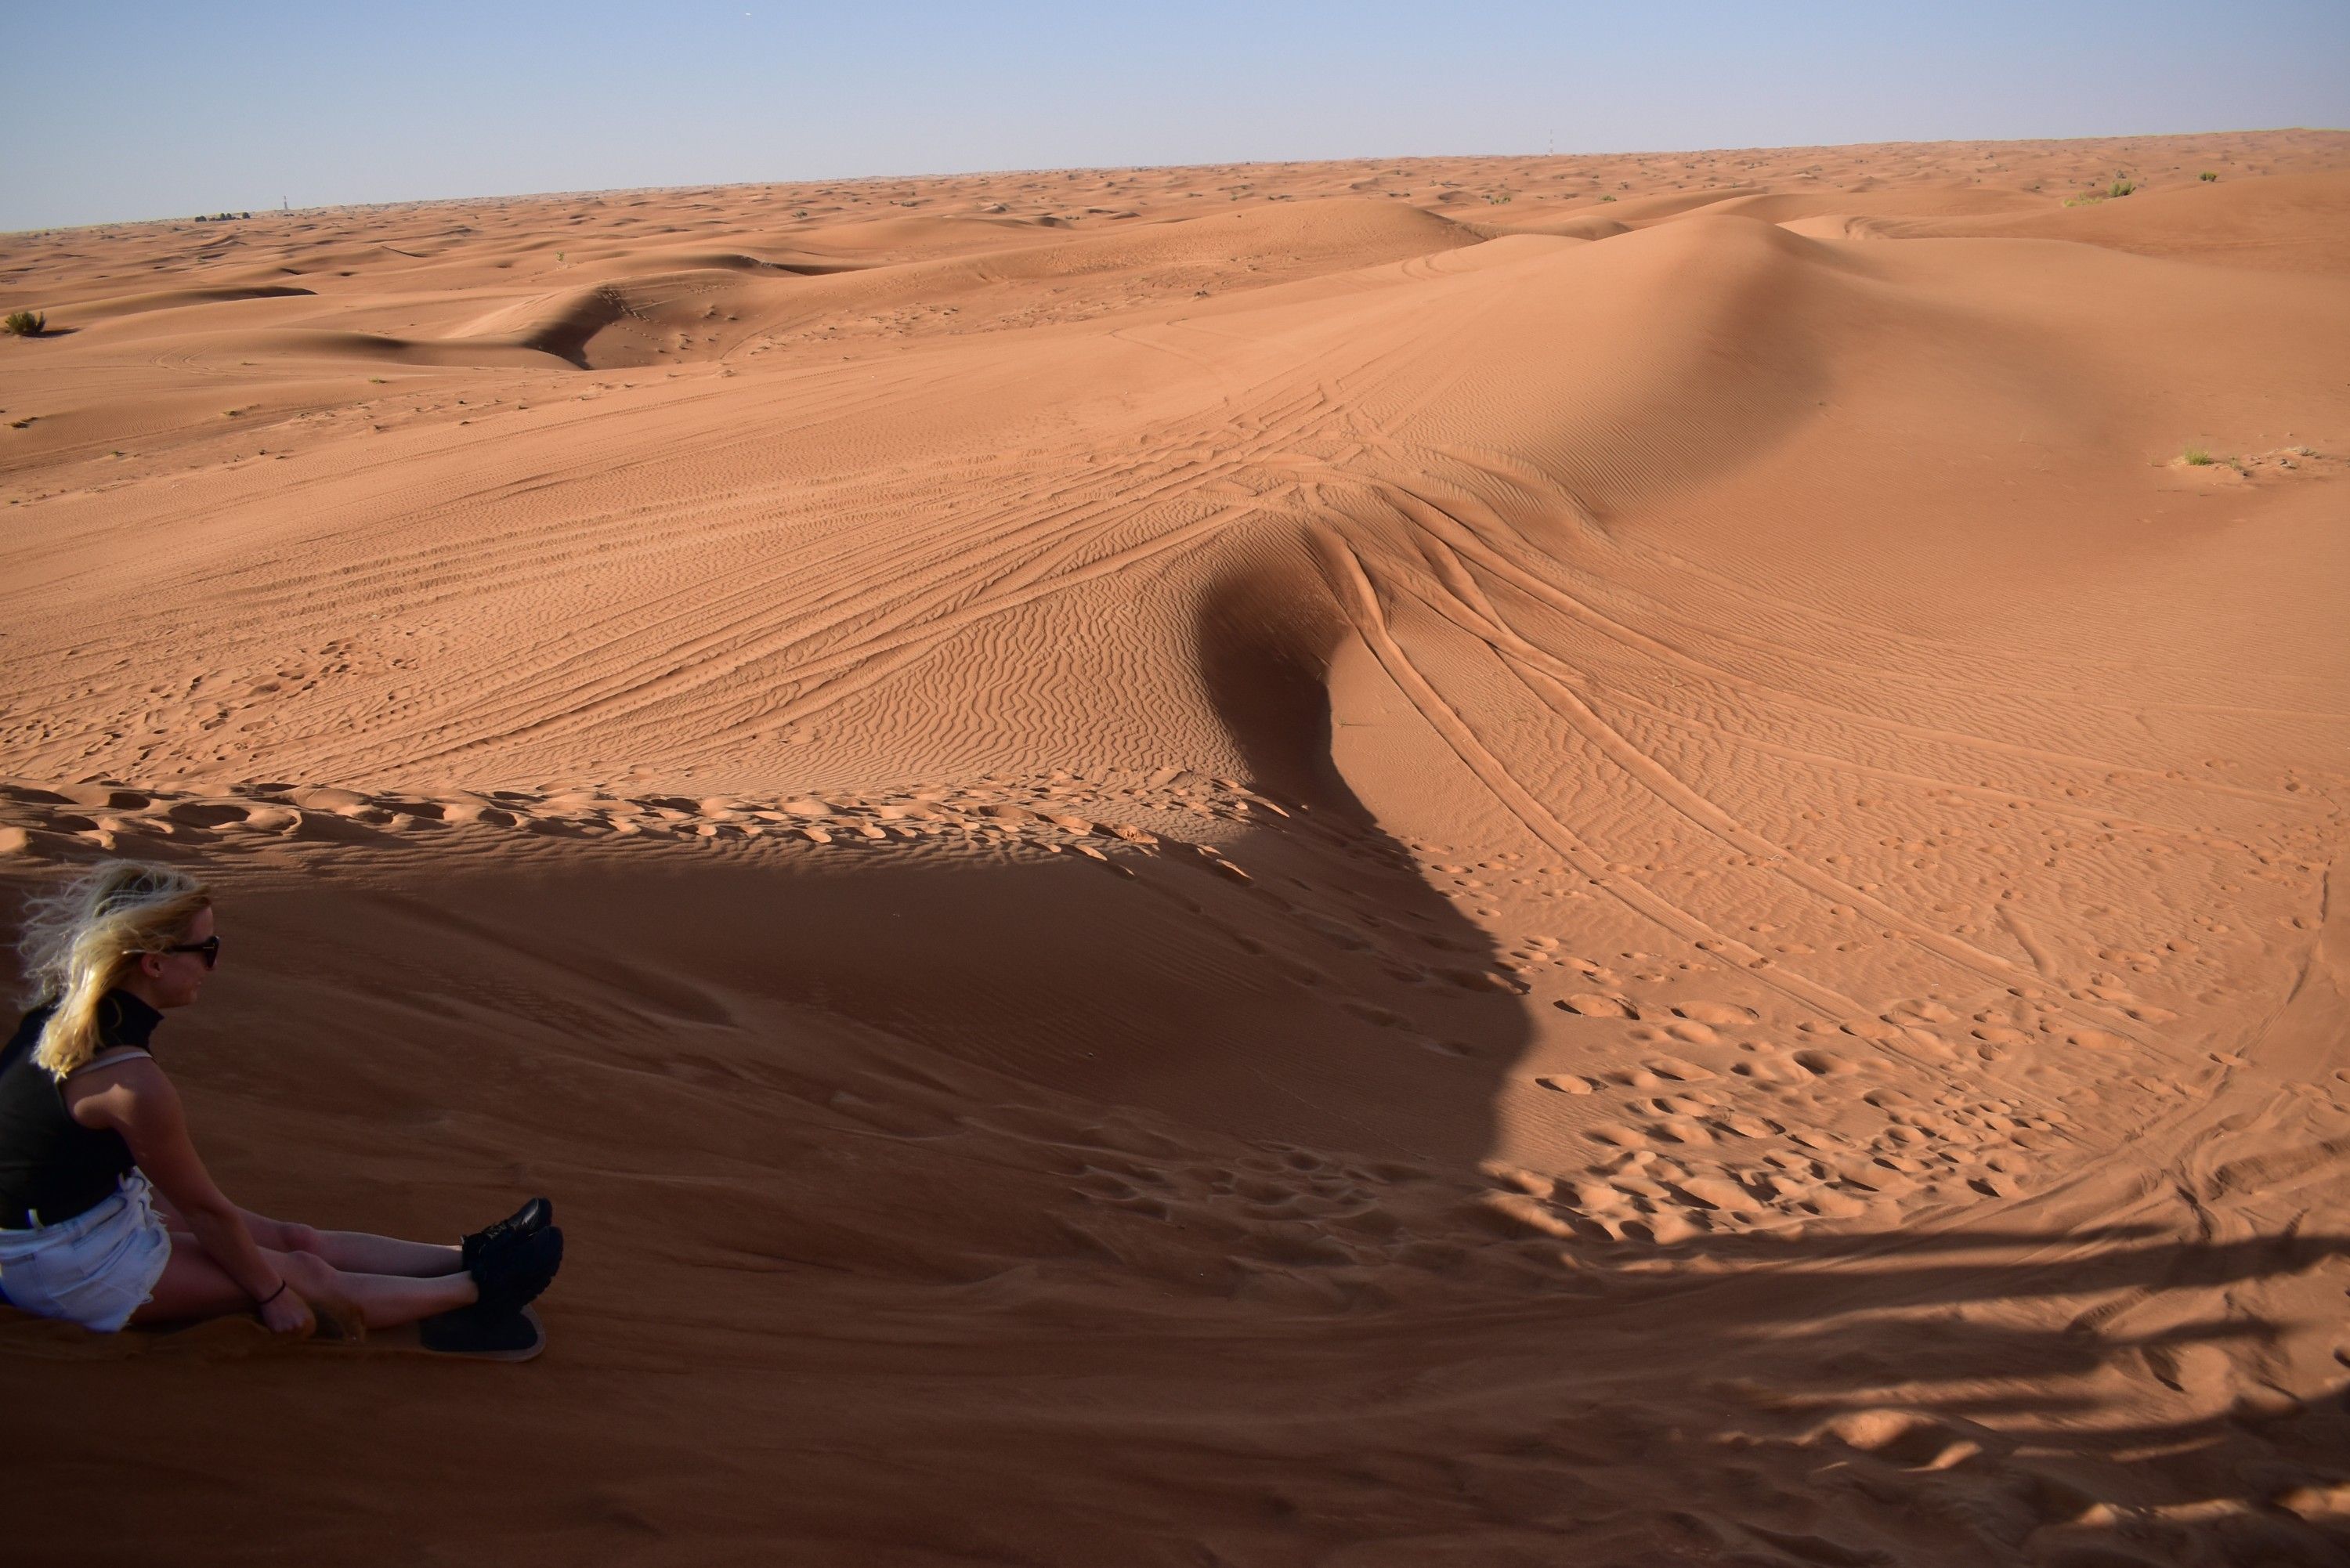 Caption: A photo of Local Guide @MoniDi doing sand sledding in the desert (A friend took the photo)